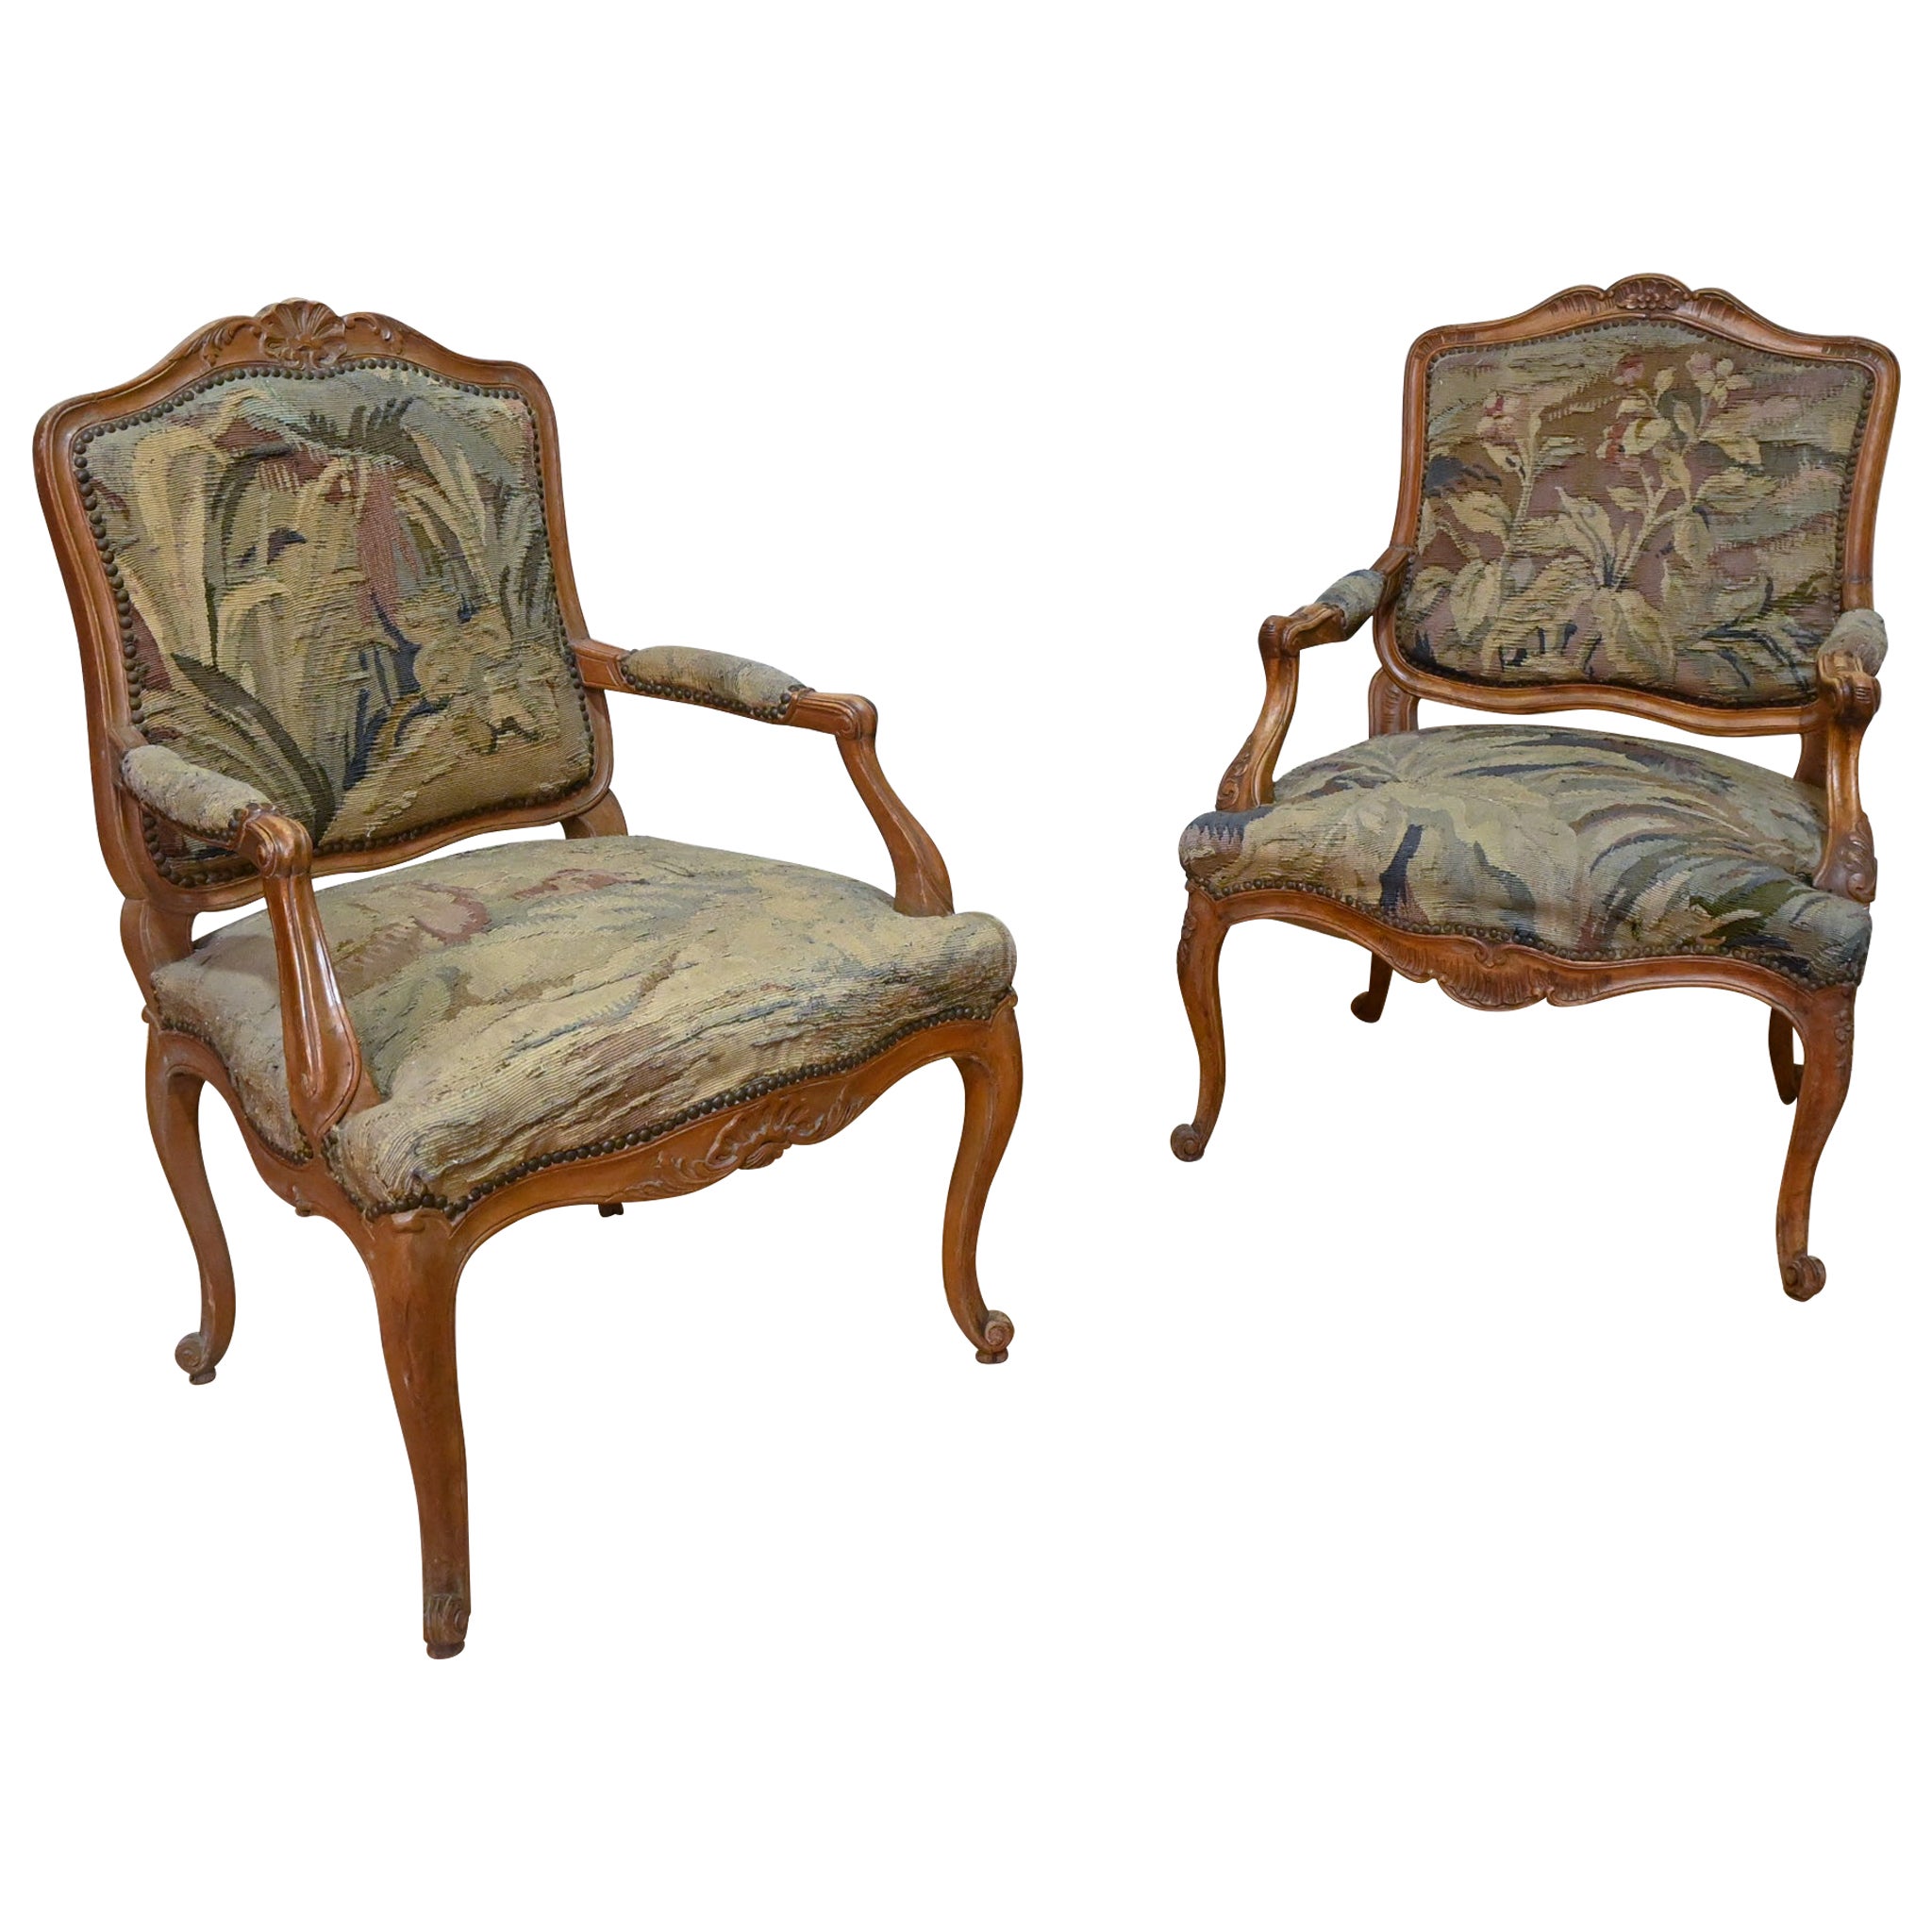 A Near Pair 19th Century French Louis XV Fauteuils Open Armchairs - Tapestry For Sale